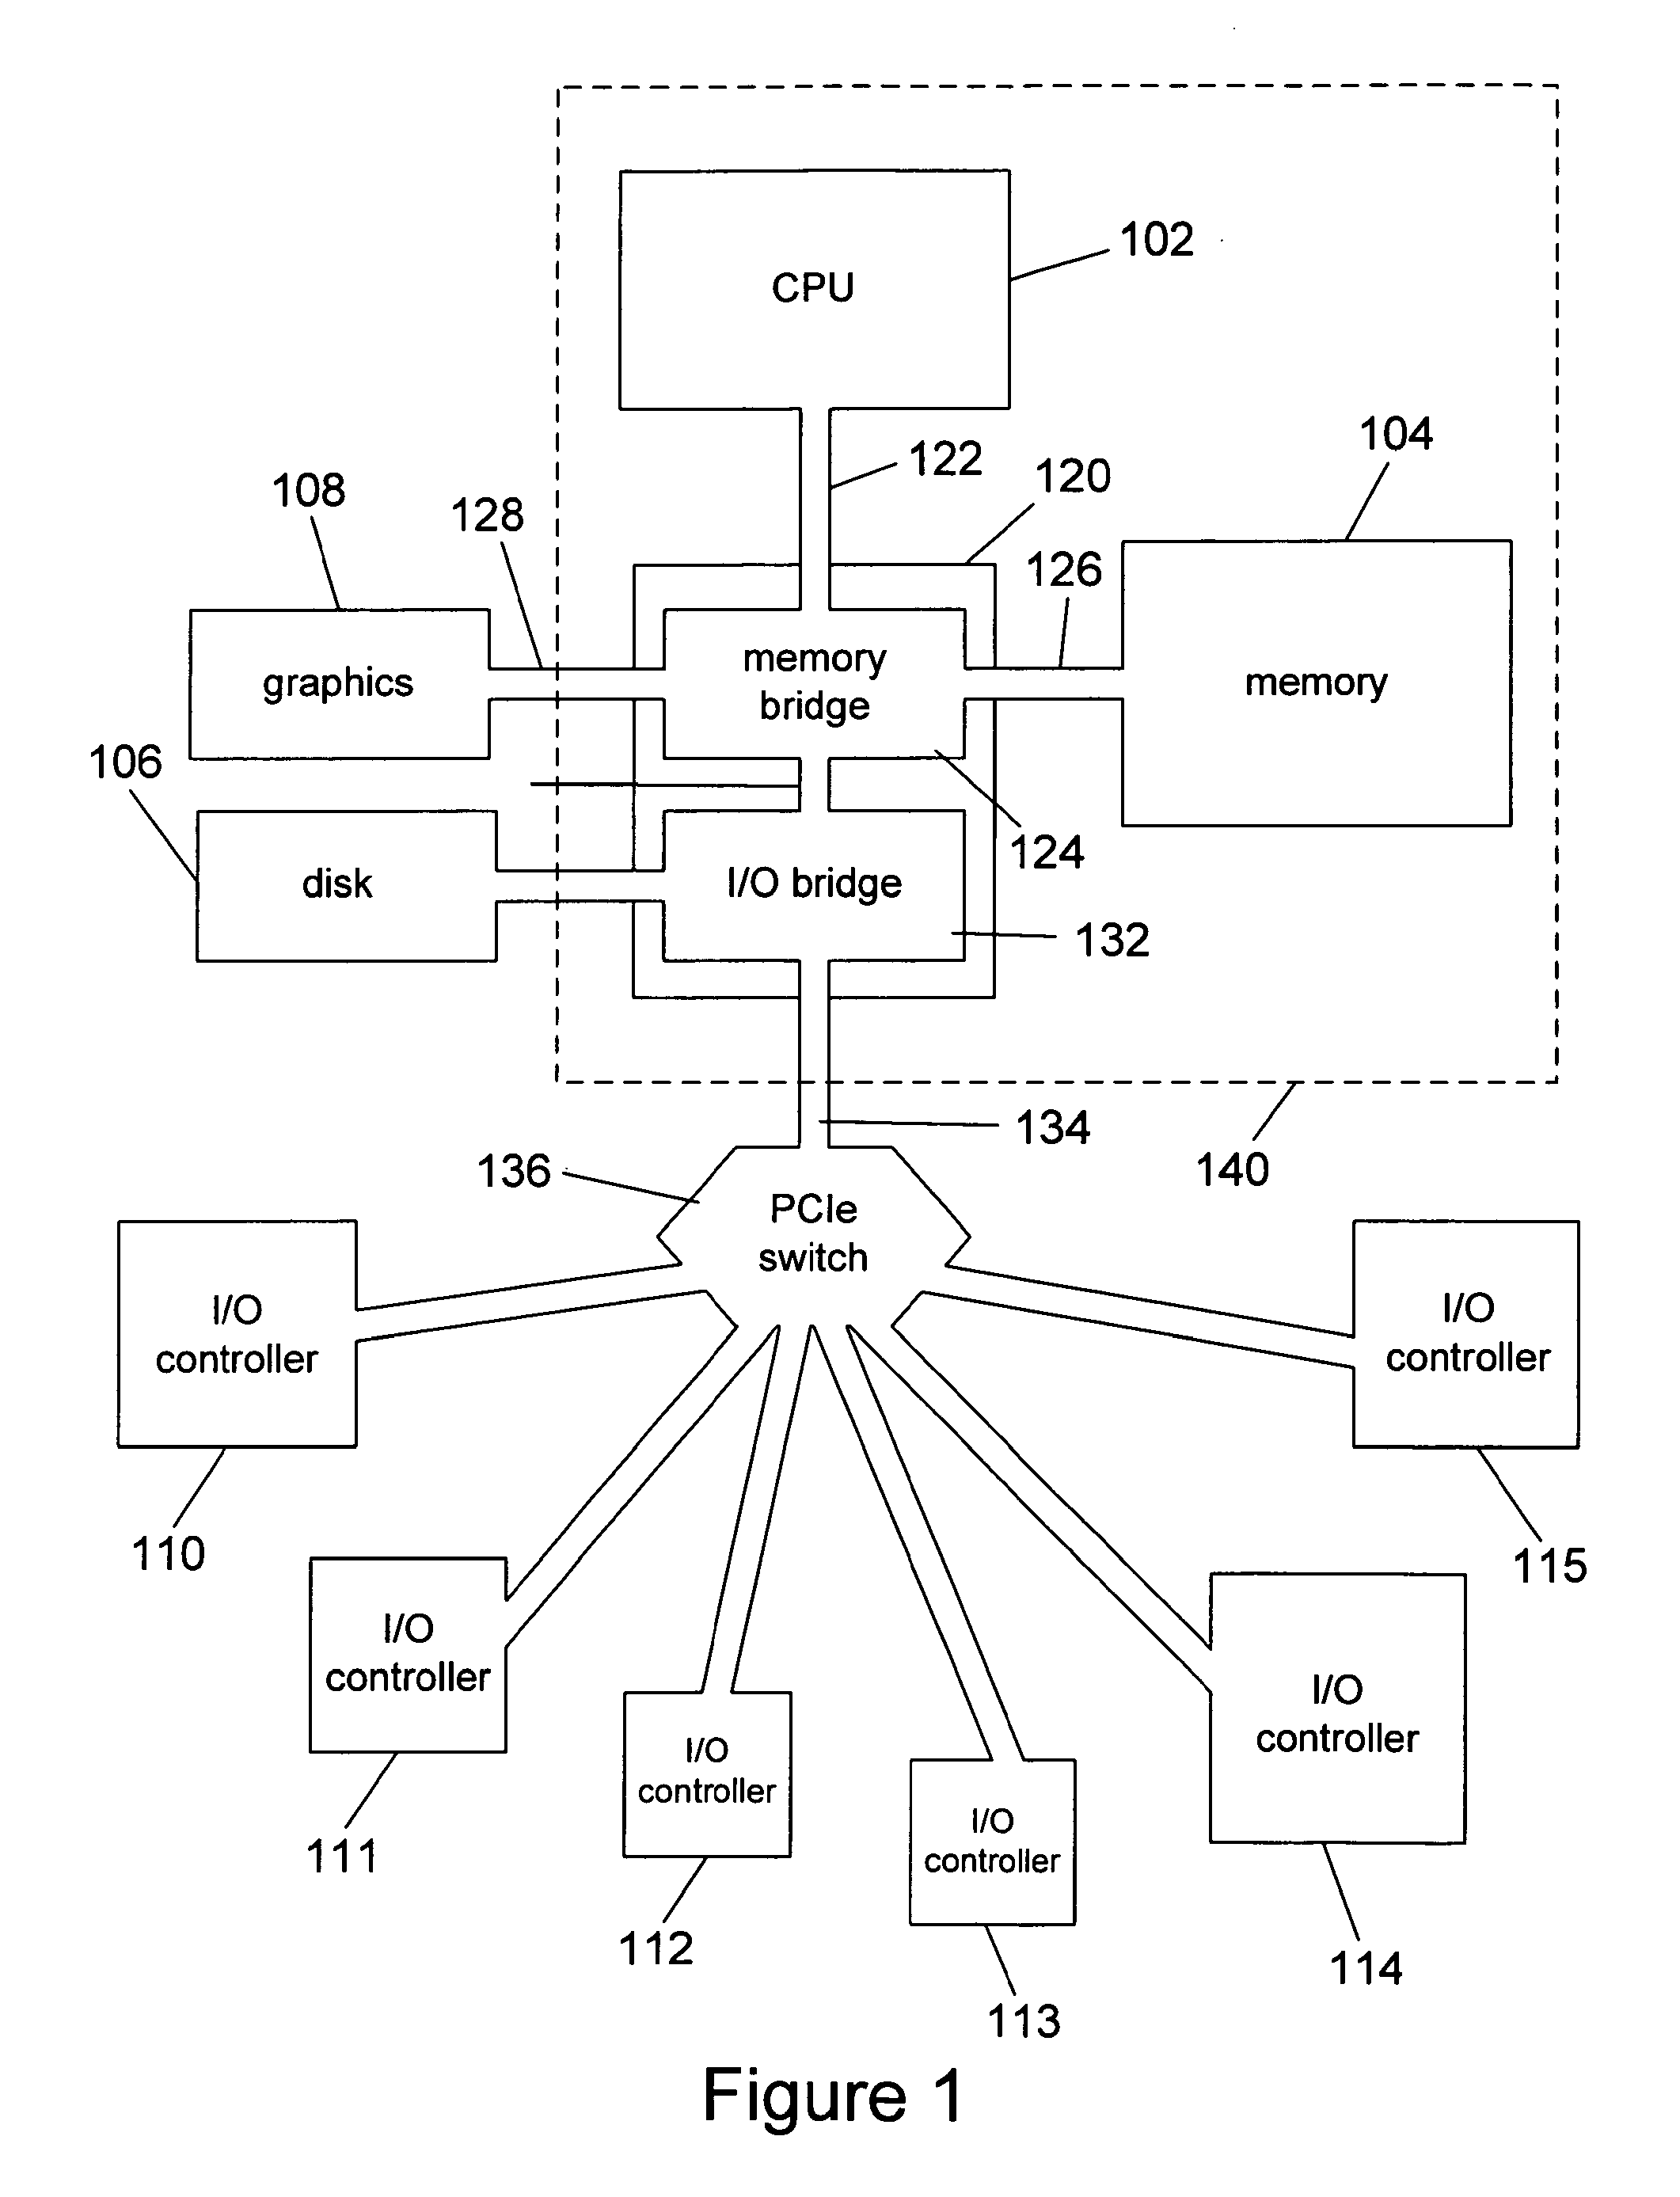 Method and system for generating and delivering inter-processor interrupts in a multi-core processor and in certain shared memory multi-processor systems